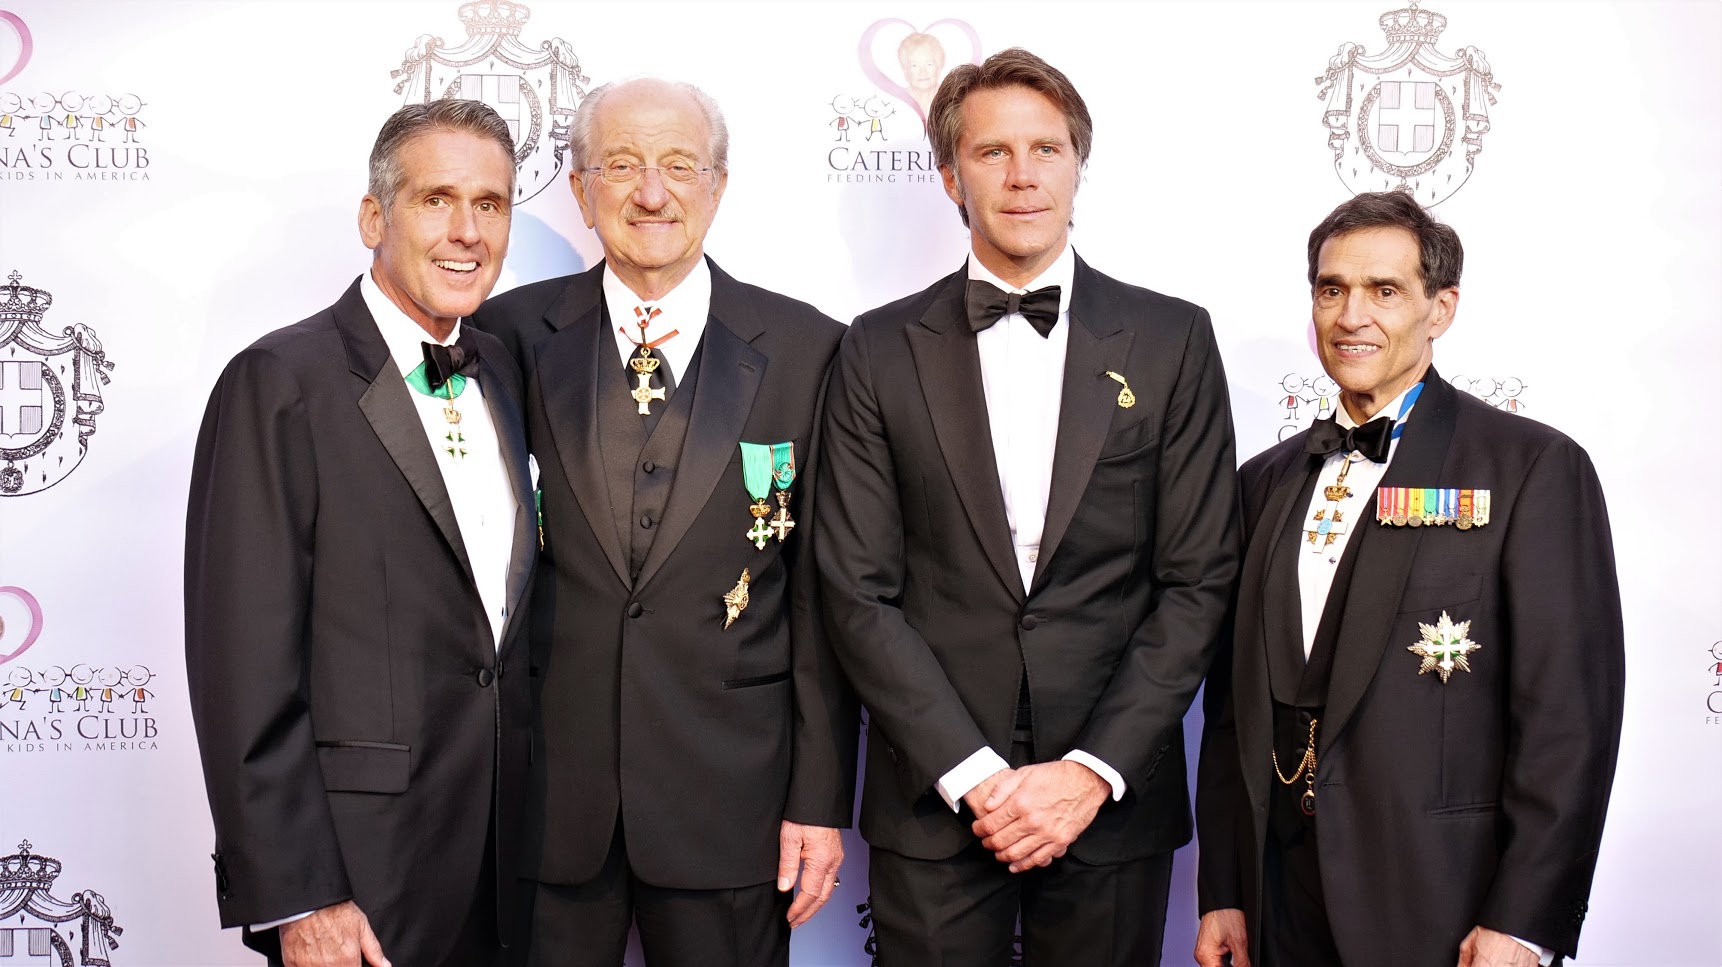 Event Chair Daniel J. McClory, Grand Patron Richard Cuneo, HRH Prince Emmanuel Philibert of Savoy with Savoy Foundation Chairman Carl J. Morelli and US Delegate of the Savoy Orders